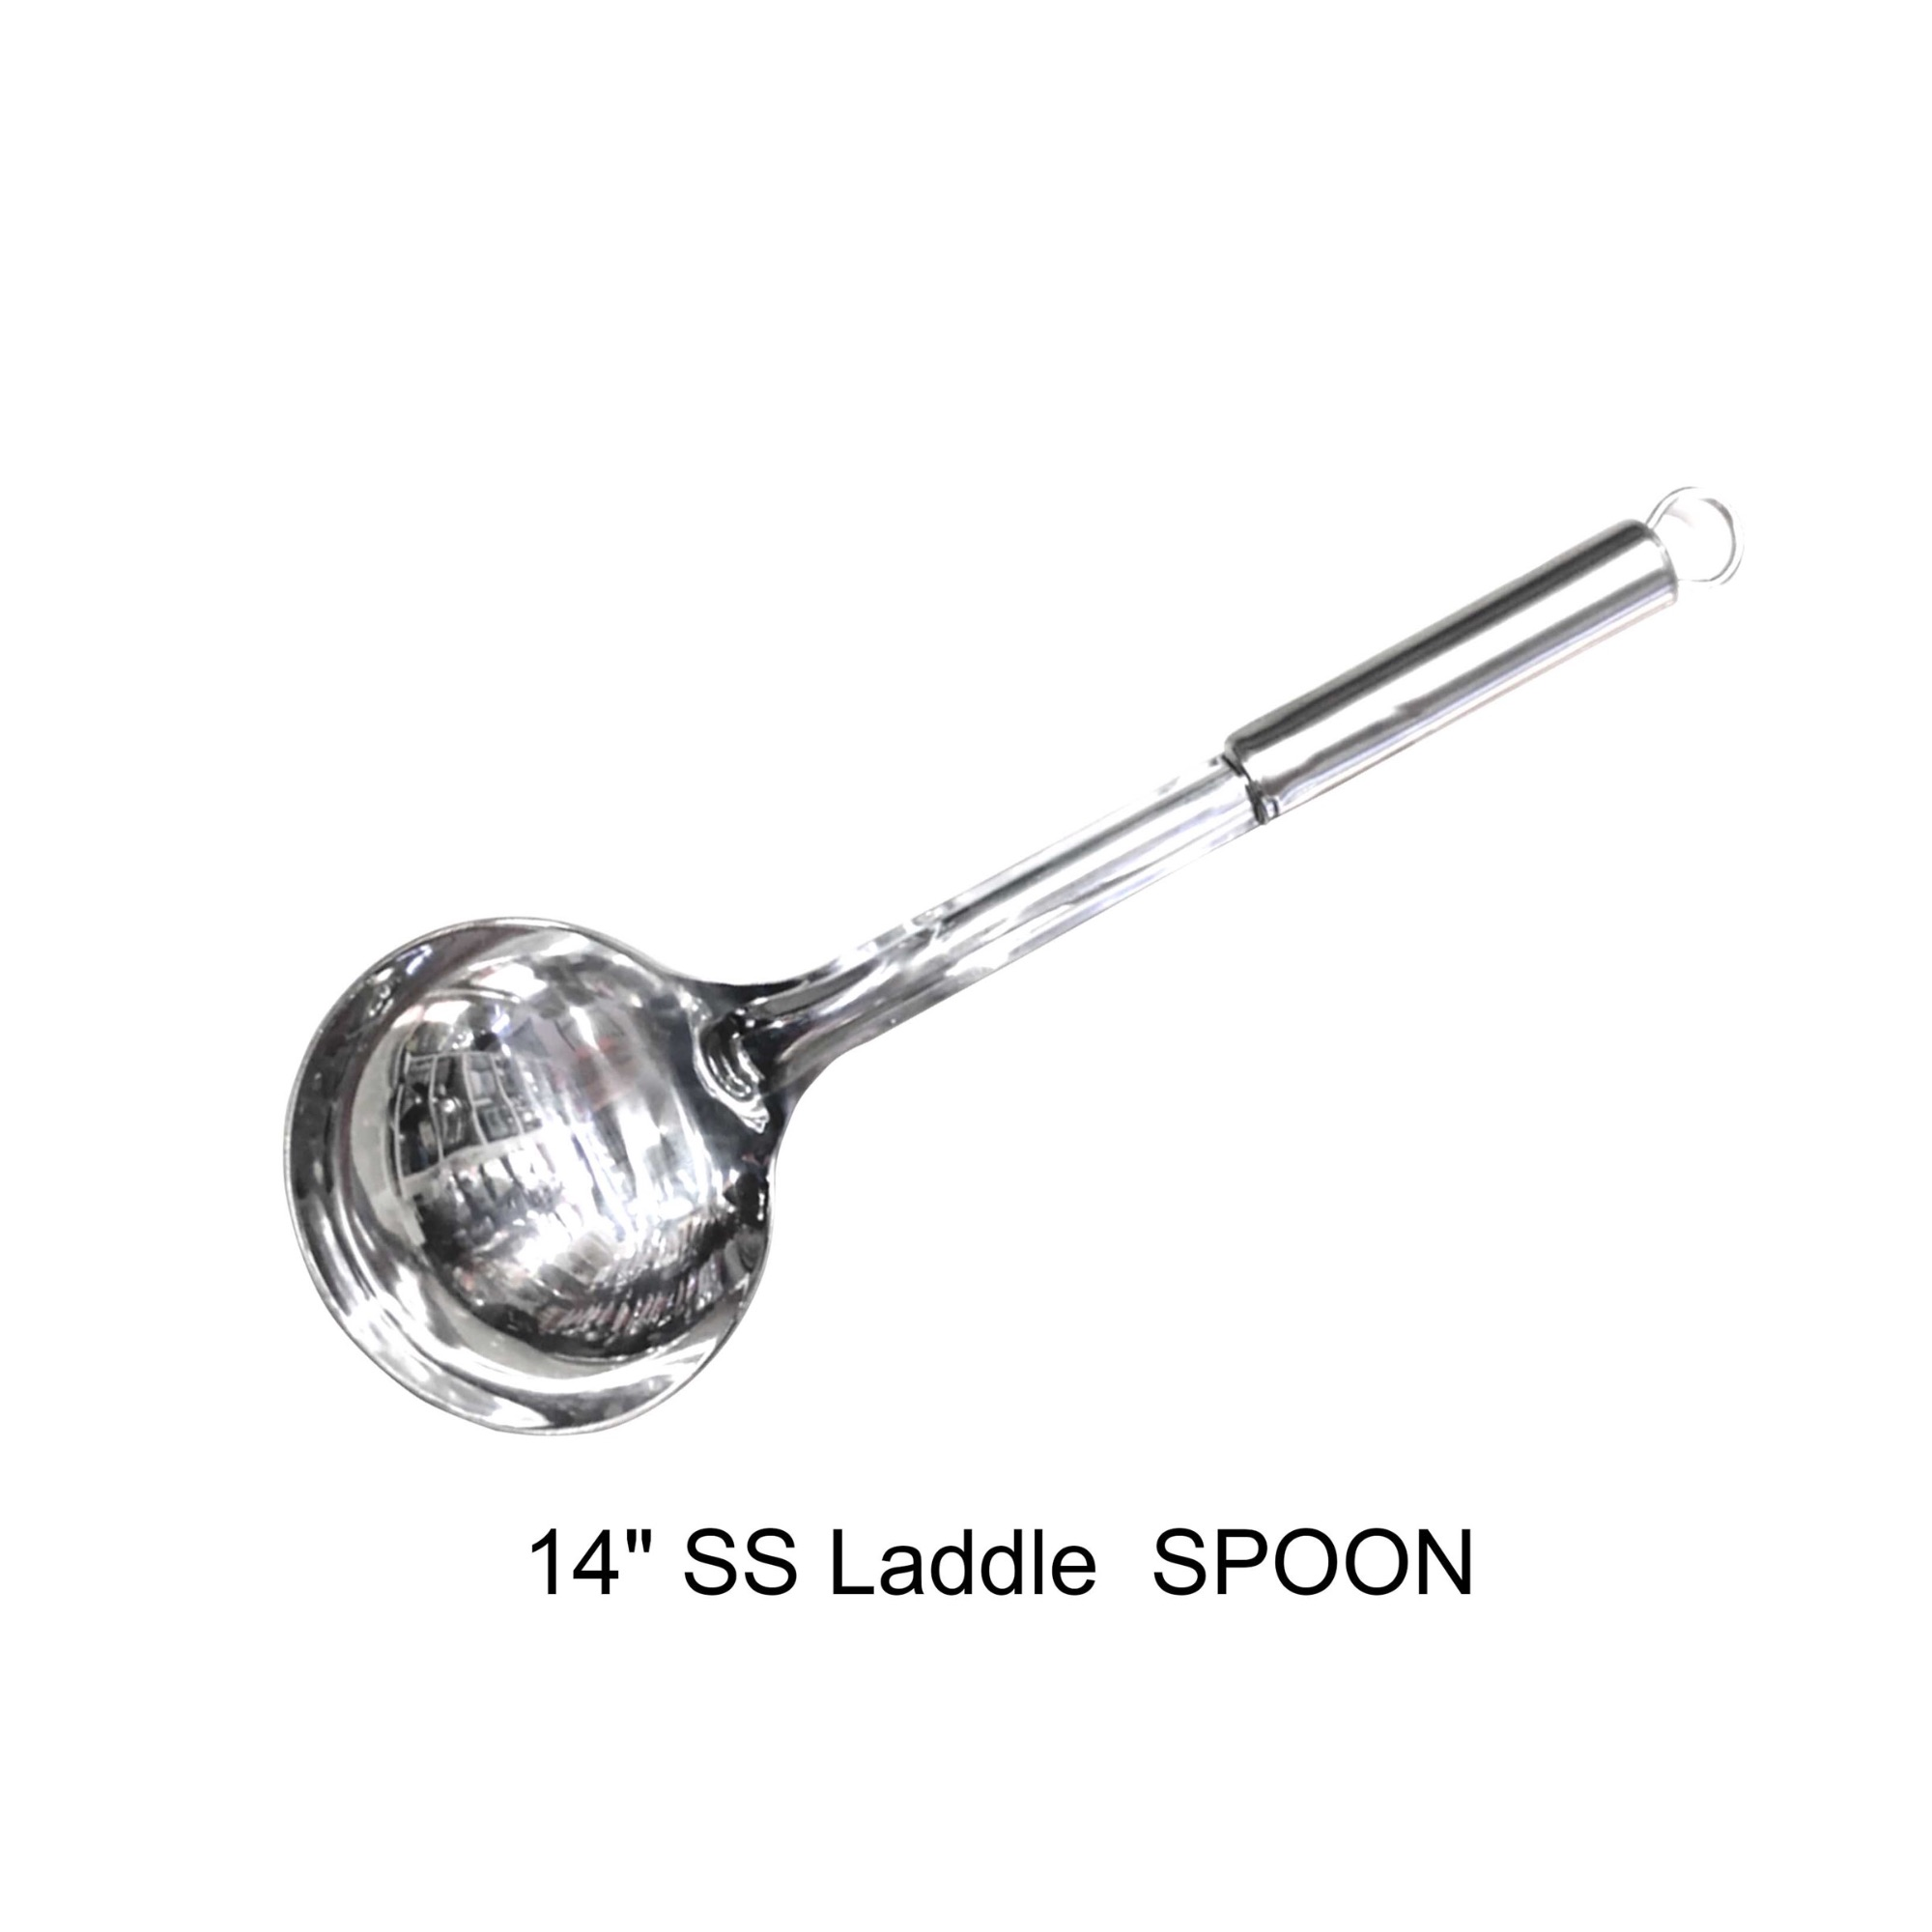 Stainless Steel Laddle Spoon - 14 Inch